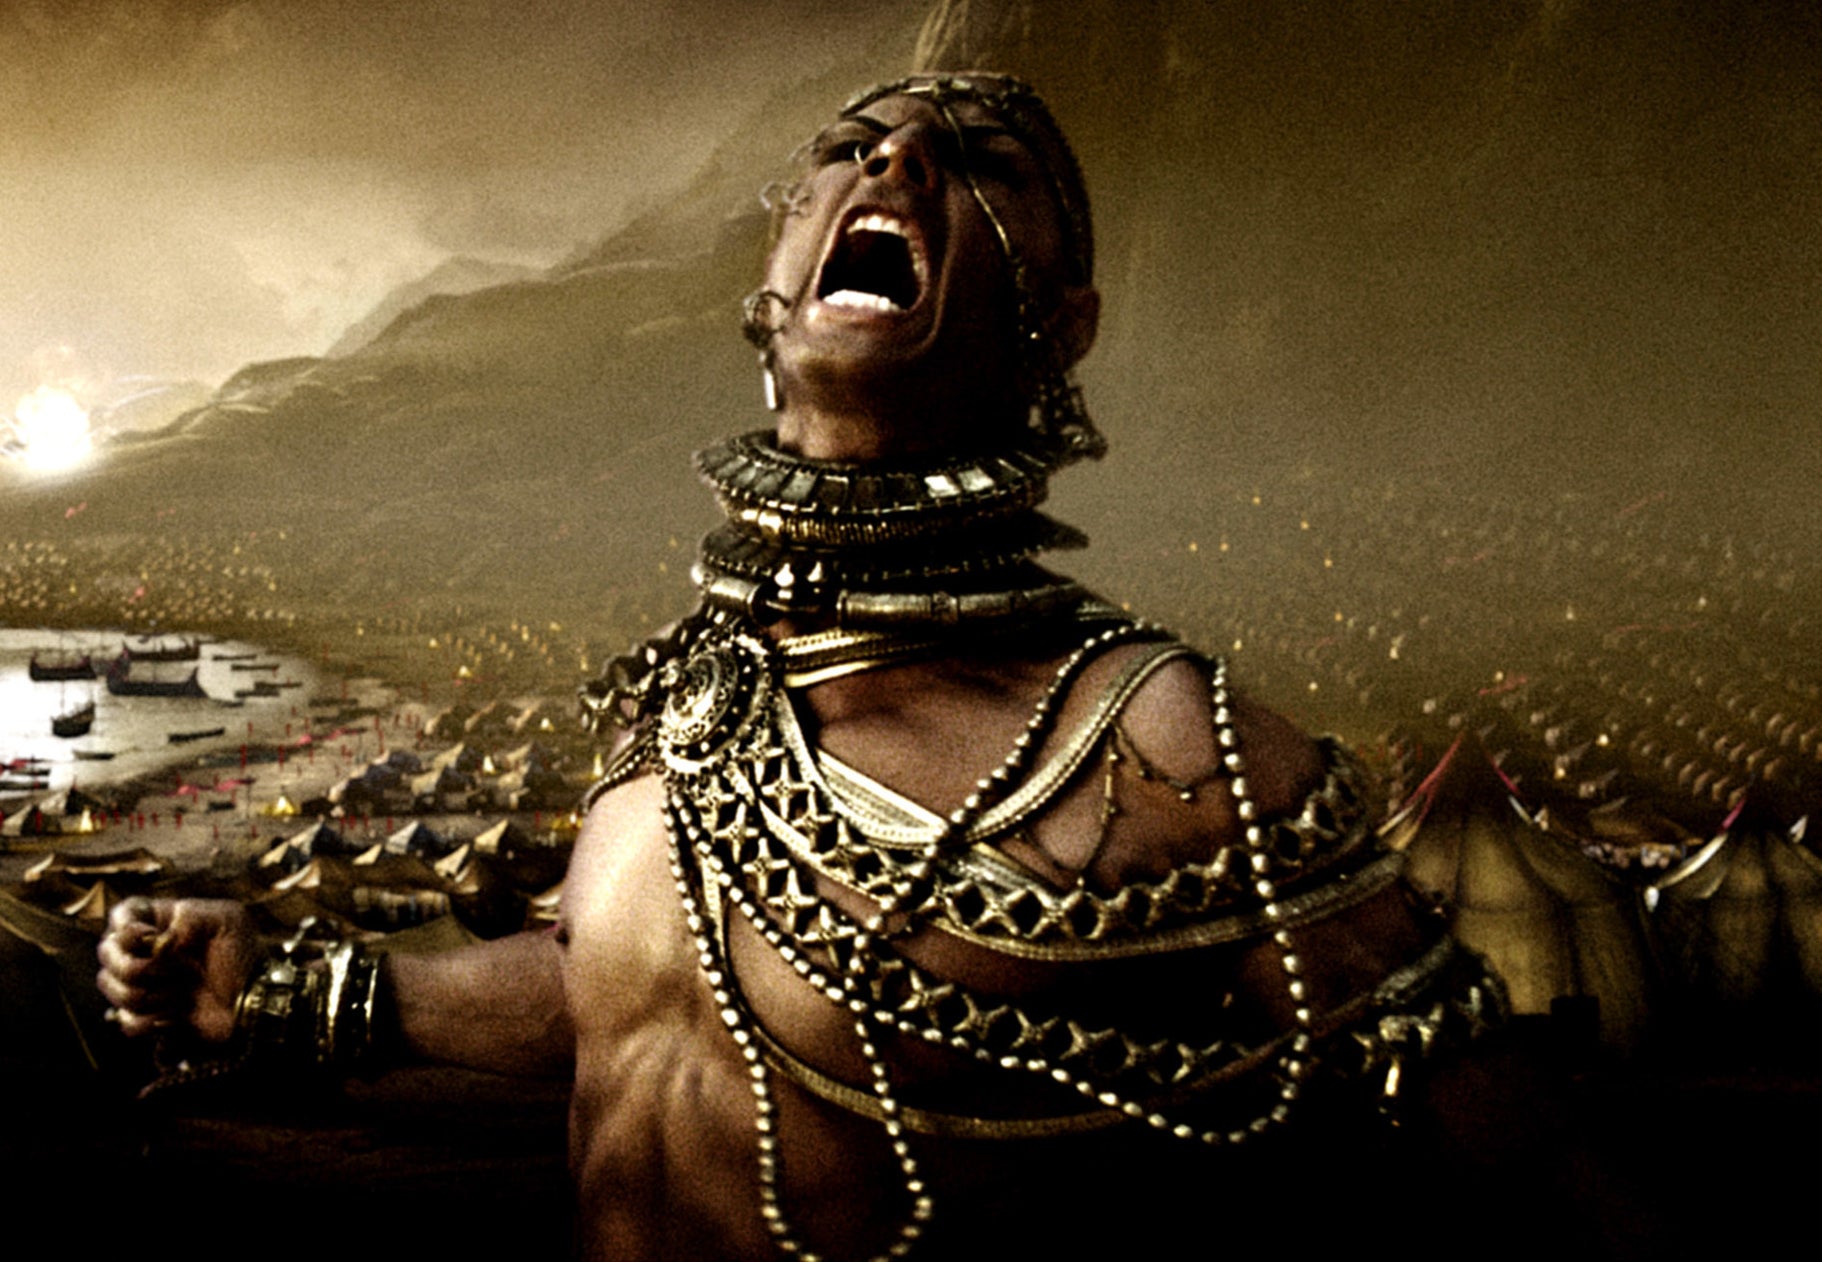 Rodrigo Santoro in 300 in a chained warrior outfit and looking fierce